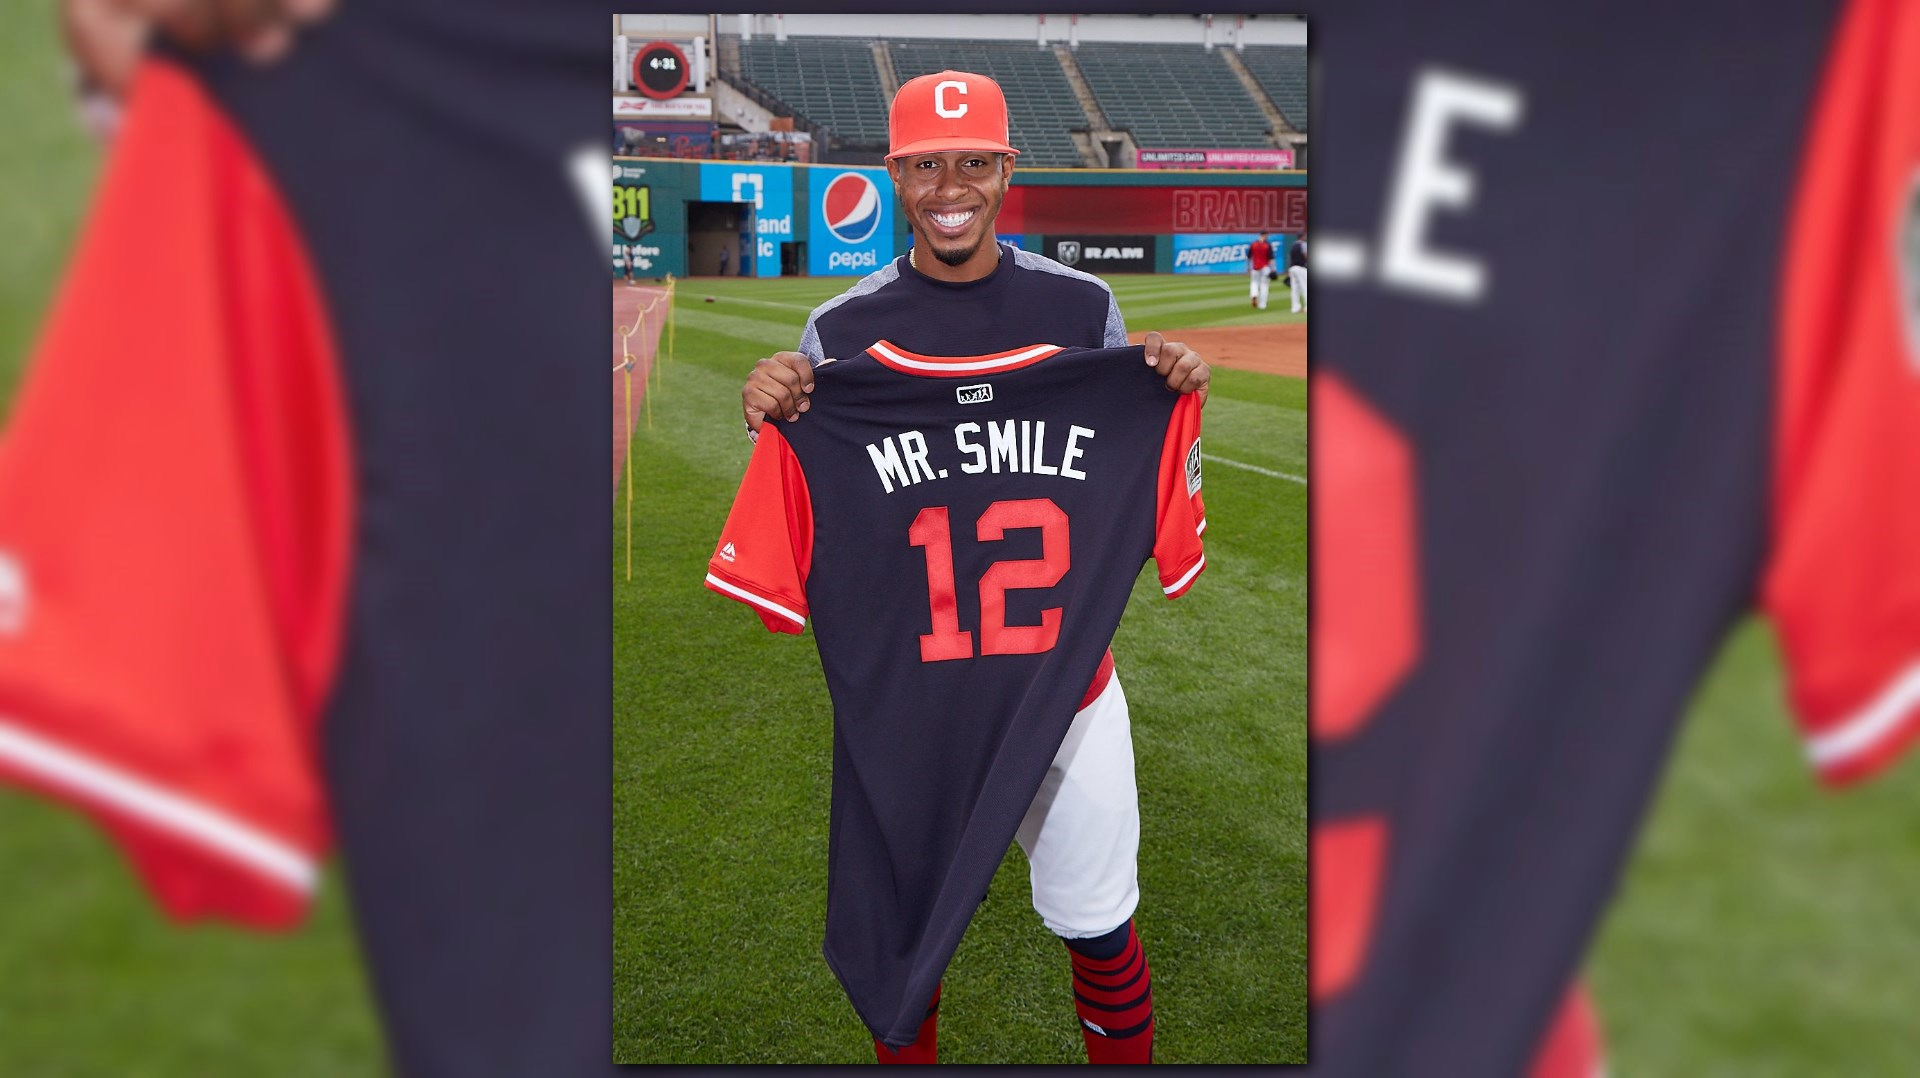 As MLB Players' Weekend returns, Cleveland Indians players stand out with  nicknames, uniforms, cleat designs 